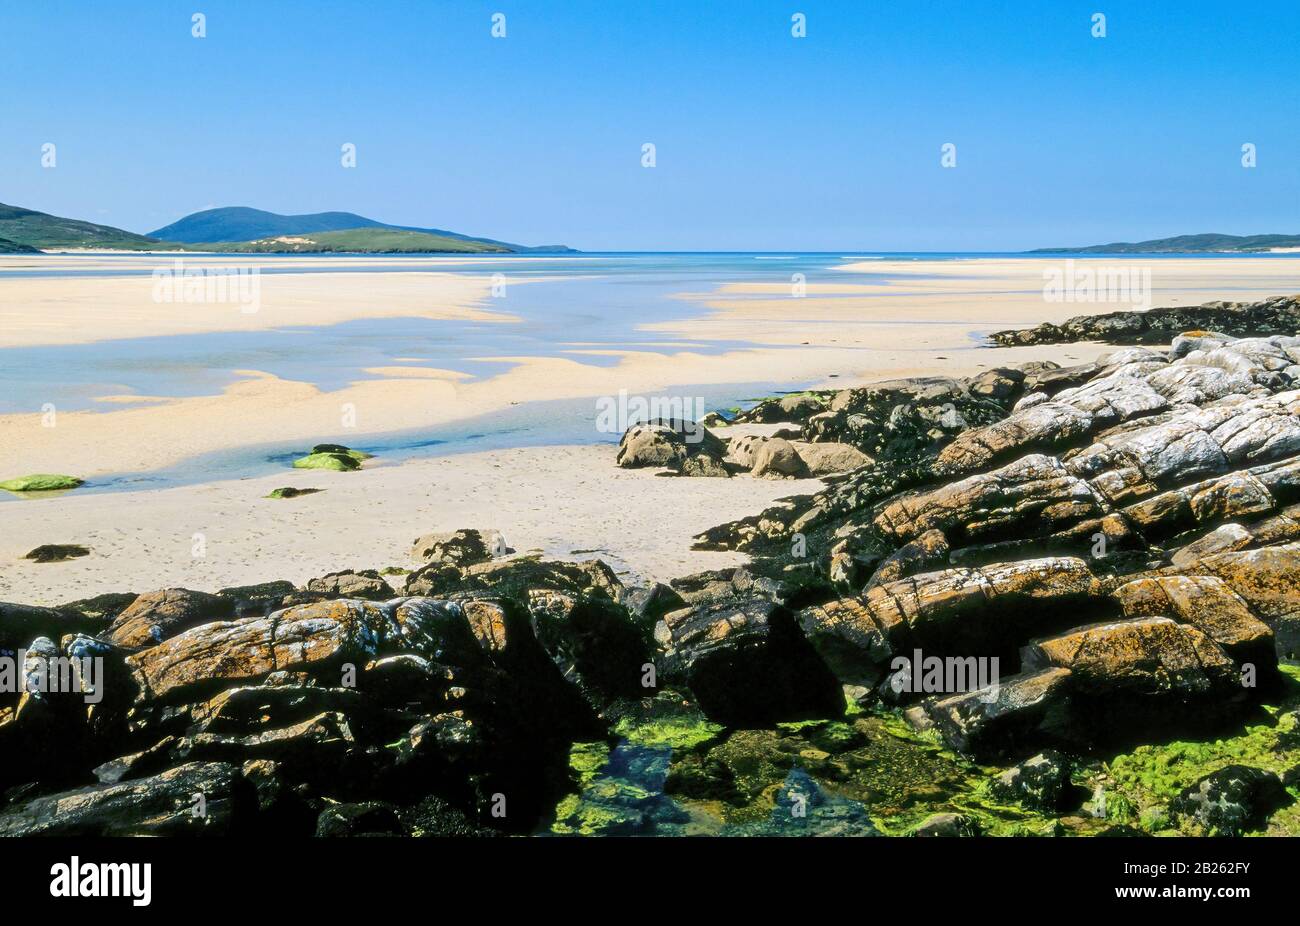 Rocky shoreline and sands of Luskentyre (Losgaintir) Beach on a beautiful Summer day in June with blue sky, Isle of Harris, Scotland, UK Stock Photo